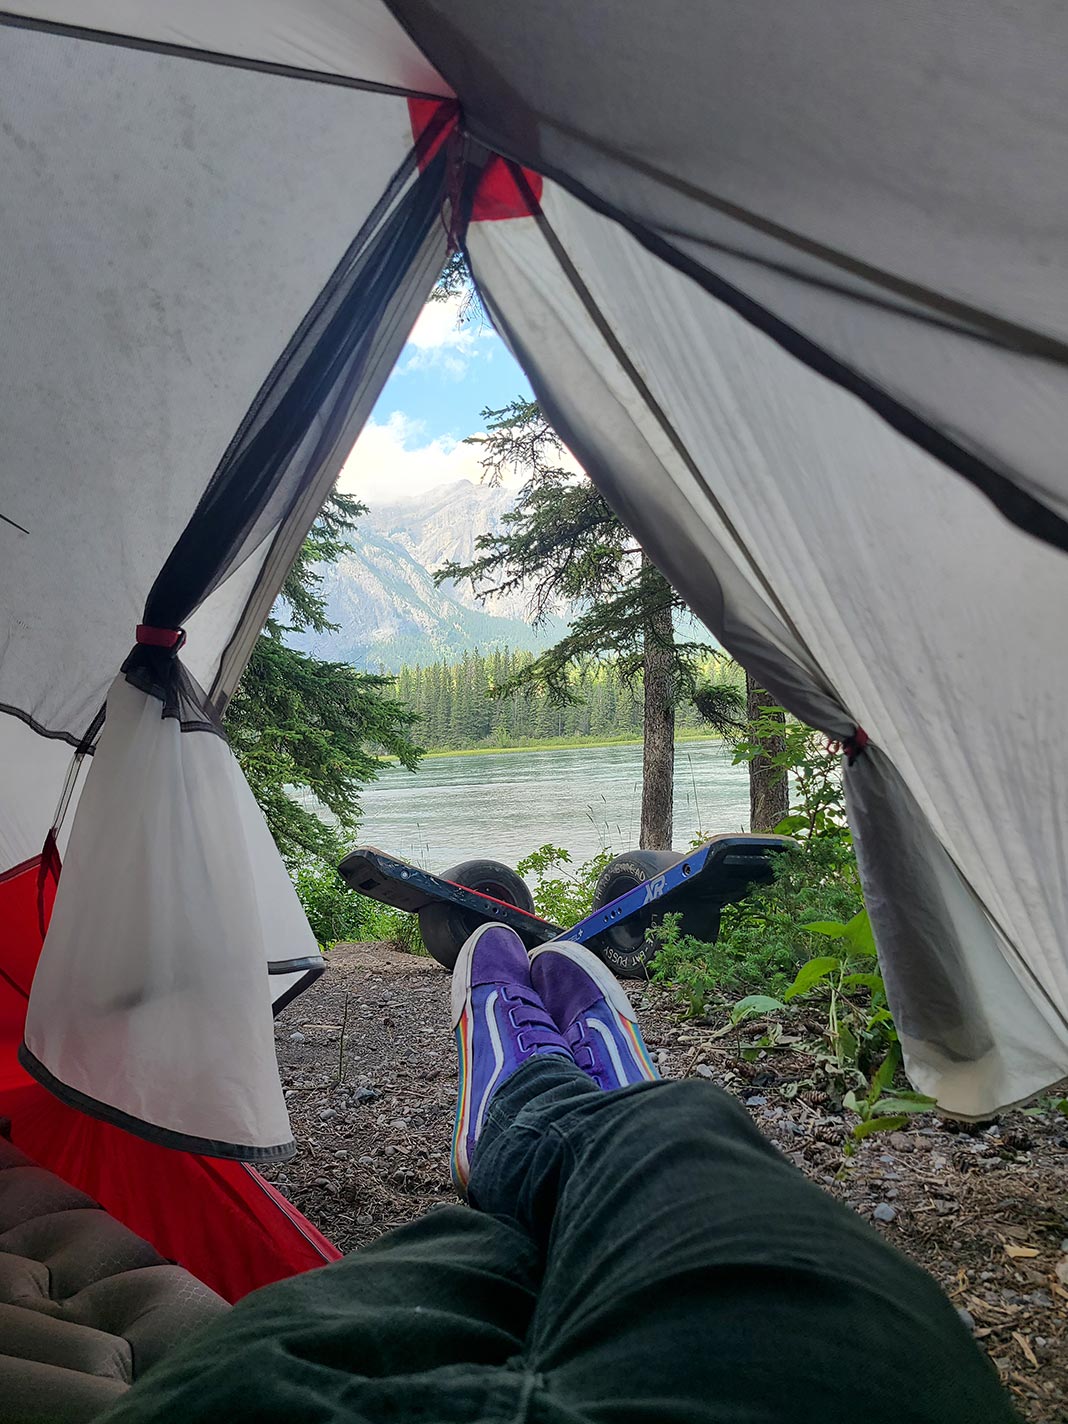 View of someone's legs sticking out of tent opening with lake and mountains in background